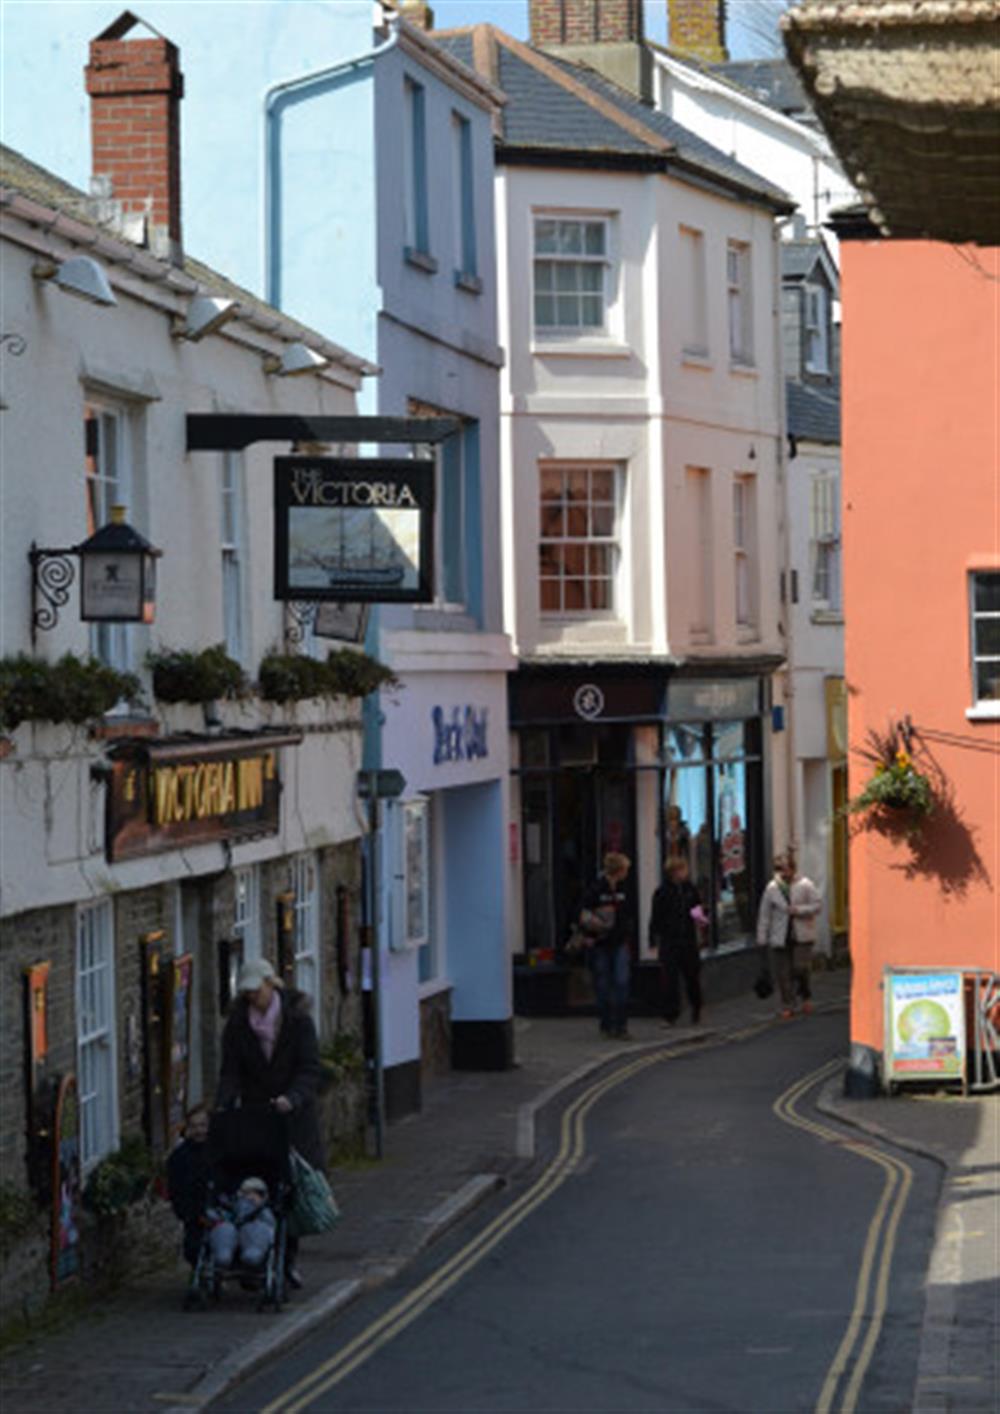 Great pubs and restaurants within 10 minutes walk at Pitcairn in Salcombe